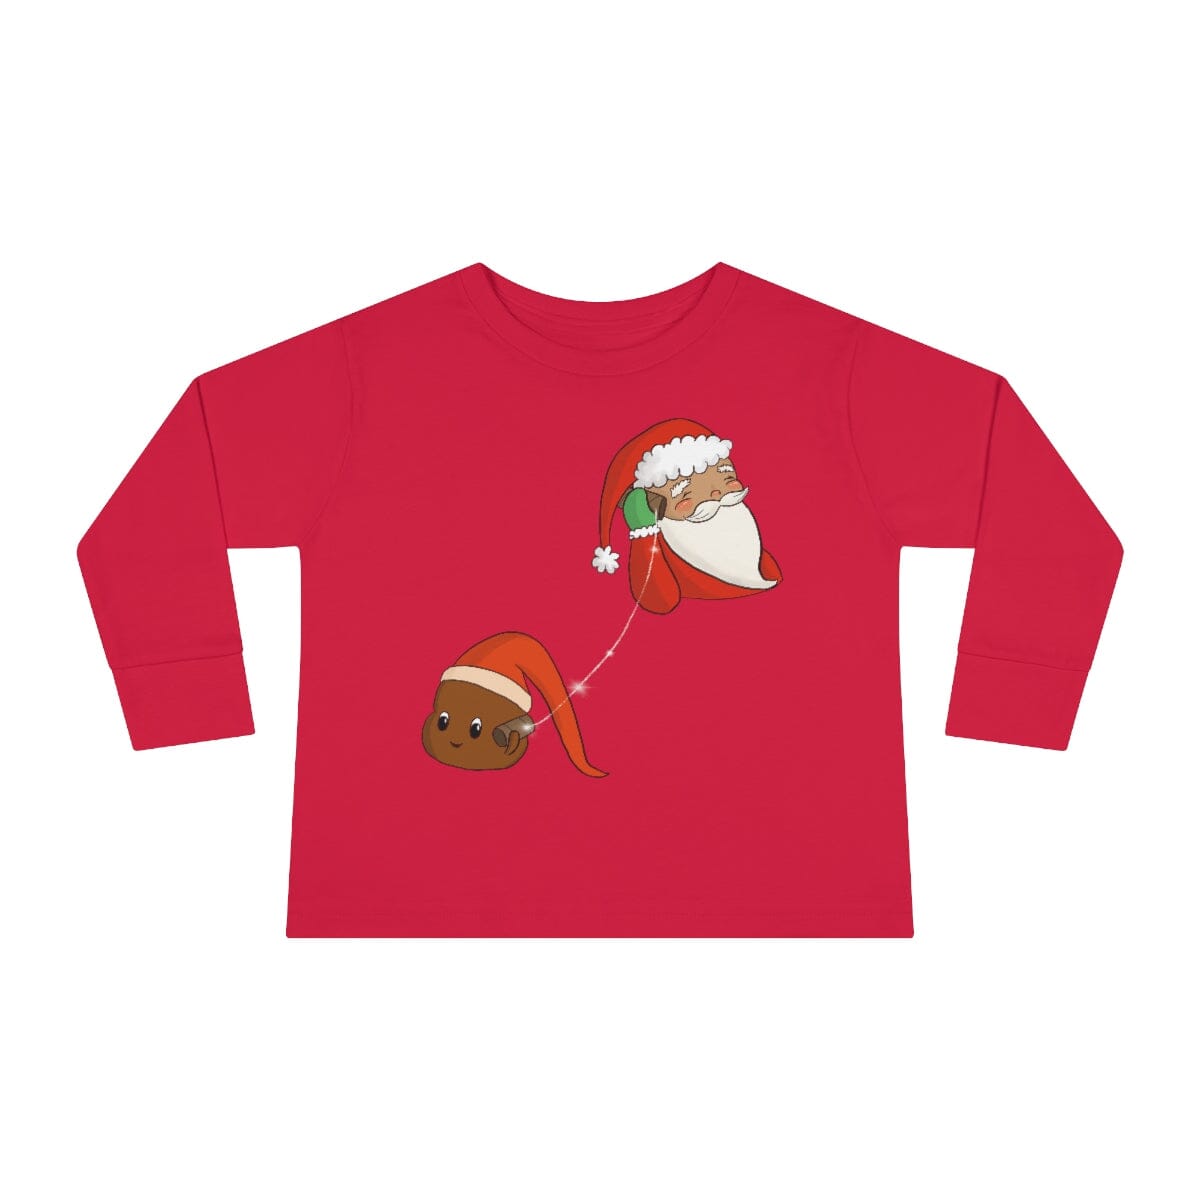 Santa Hotline - Toddler Long Sleeve Tee Kids clothes Printify Red 2T 